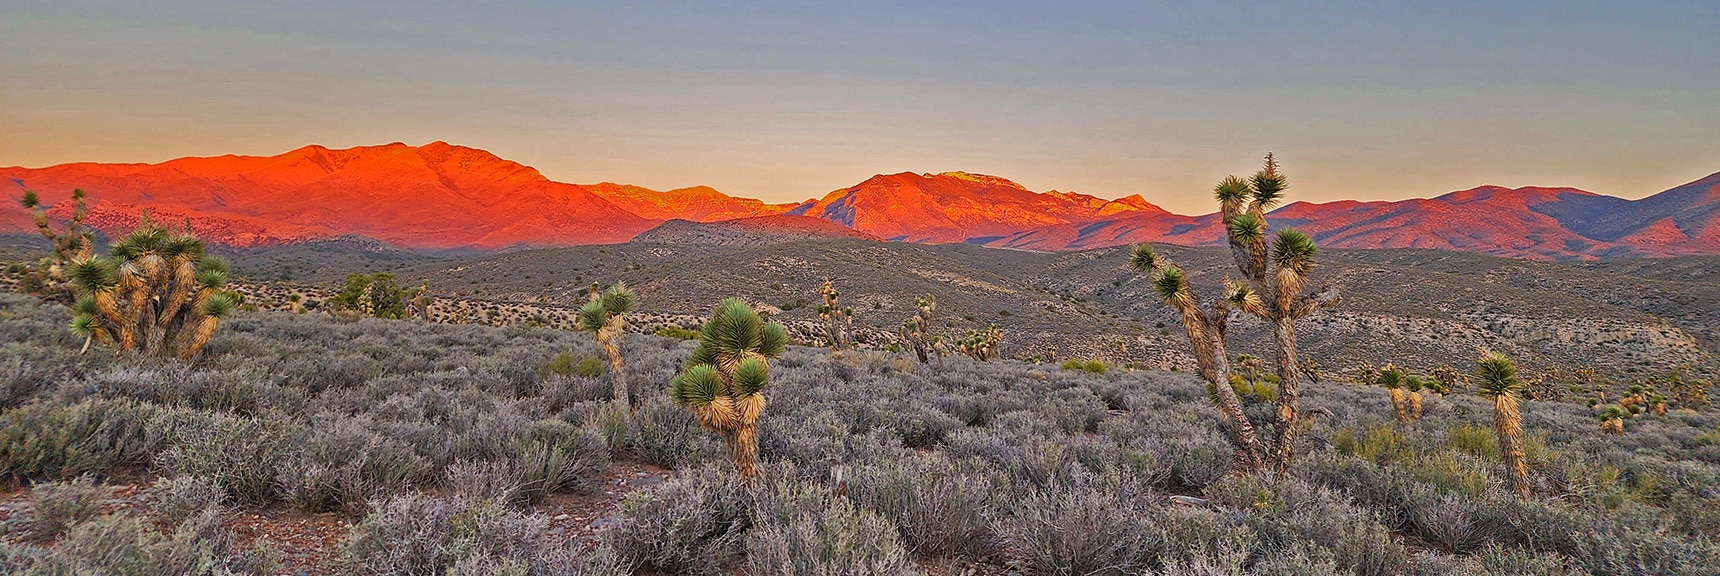 Advancing Sunrise Shifts Coloring by the Minute in Mt. Charleston Wilderness Peaks | Kyle Canyon Grand Crossing | Northern Half | La Madre Mountains Wilderness, Nevada